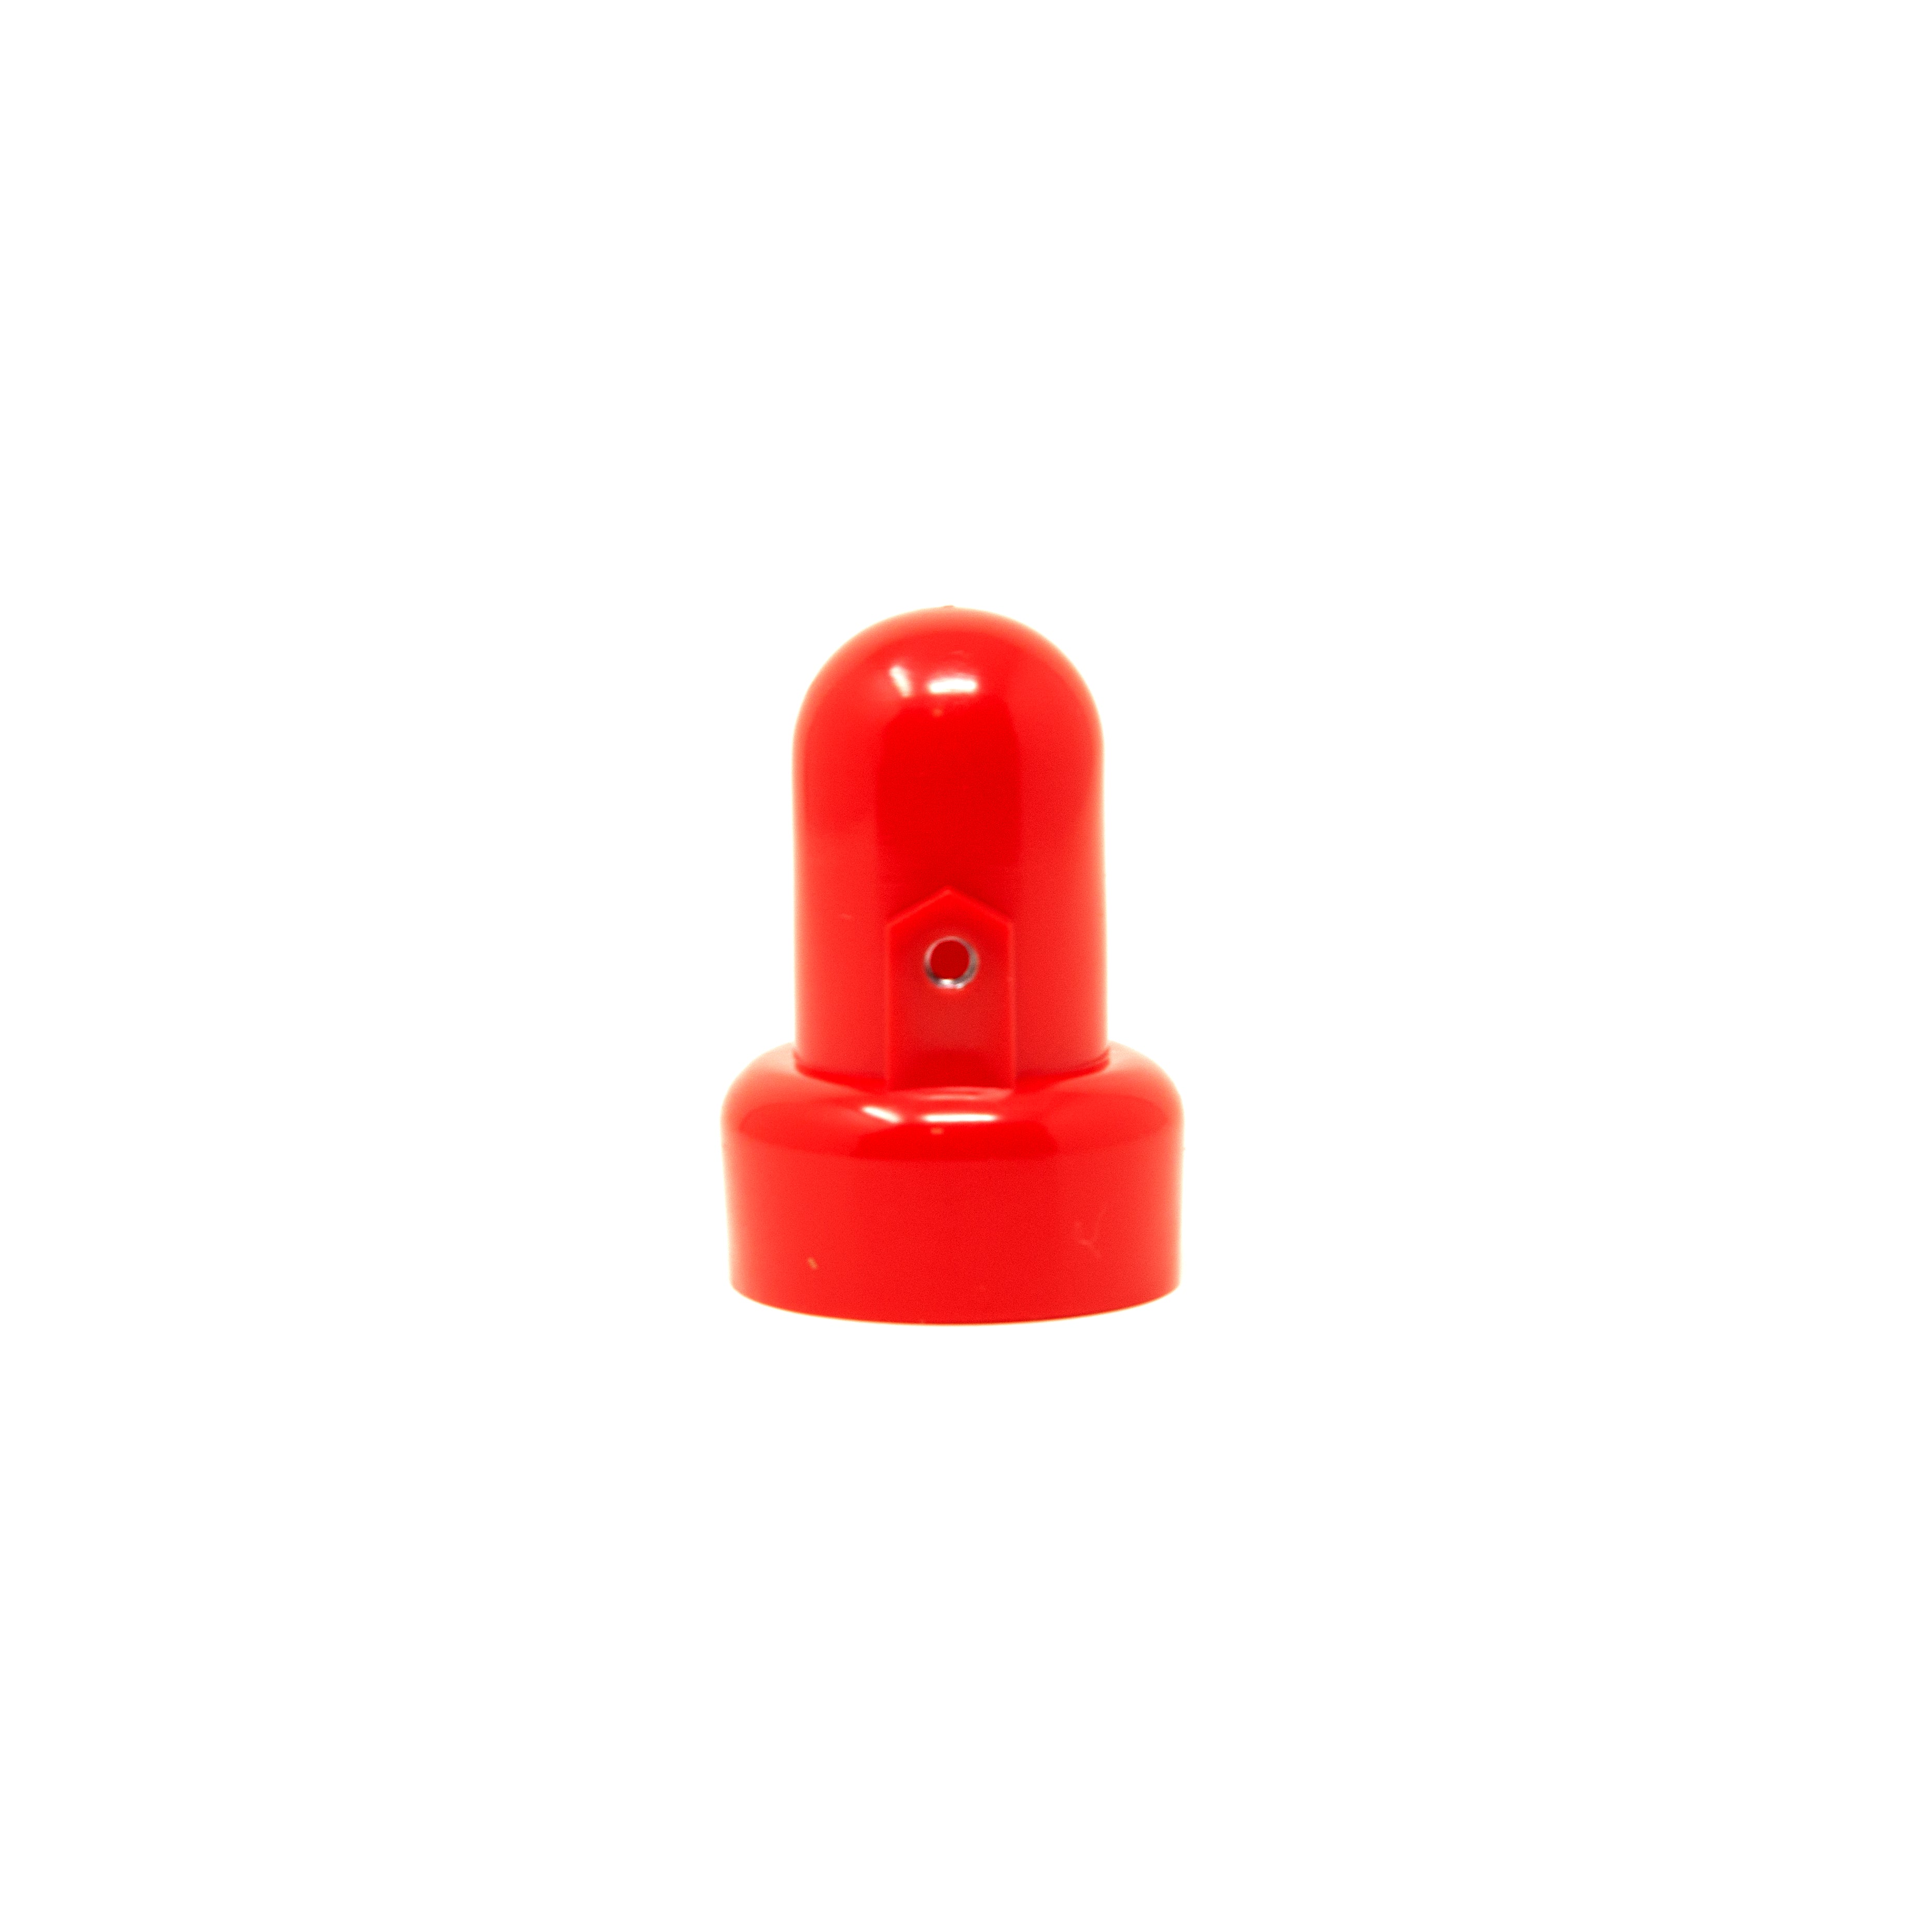 The front view of the red pole cap has a hole in the center of it. 